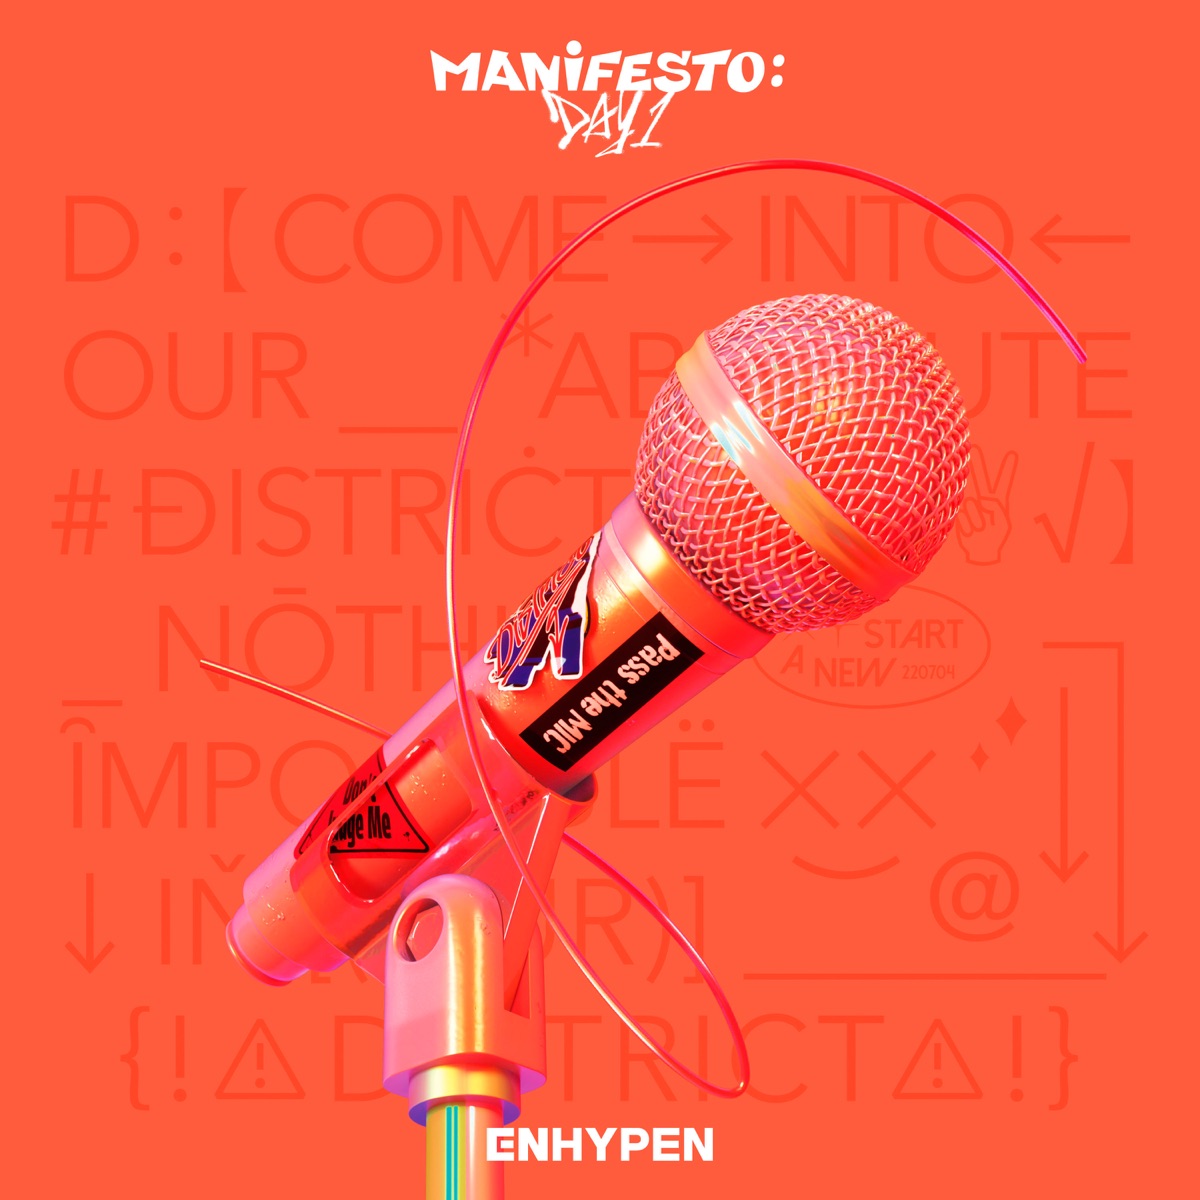 Cover art for『ENHYPEN - SHOUT OUT』from the release『MANIFESTO : DAY 1』